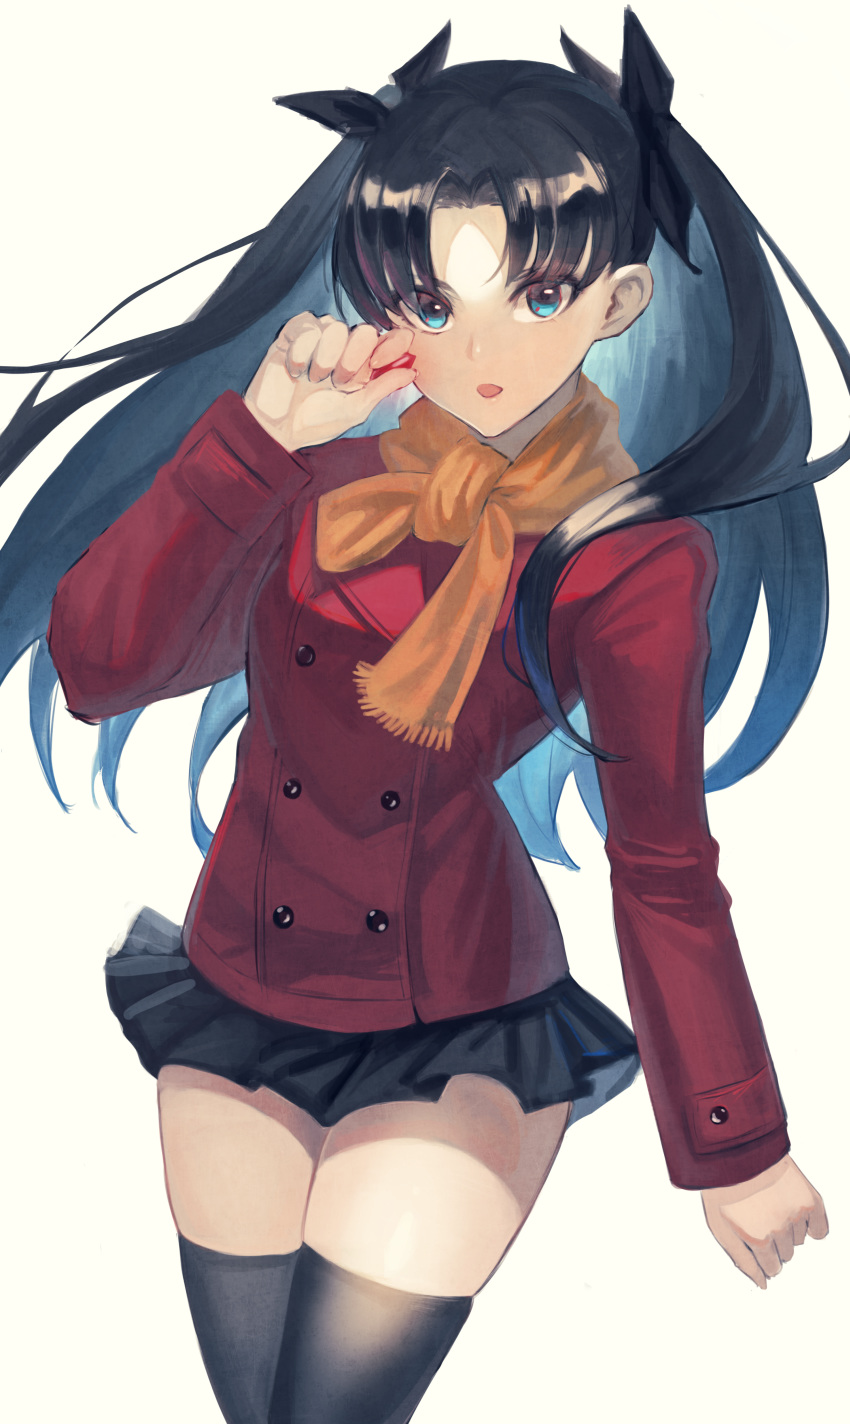 1girl absurdres bangs black_hair black_legwear black_skirt blue_eyes breasts buttons fate/stay_night fate_(series) gem highres jacket long_hair long_sleeves looking_at_viewer miniskirt open_mouth orange_scarf parted_bangs pleated_skirt red_jacket scarf skirt small_breasts thigh-highs thighs tohsaka_rin two_side_up you-6-11 zettai_ryouiki